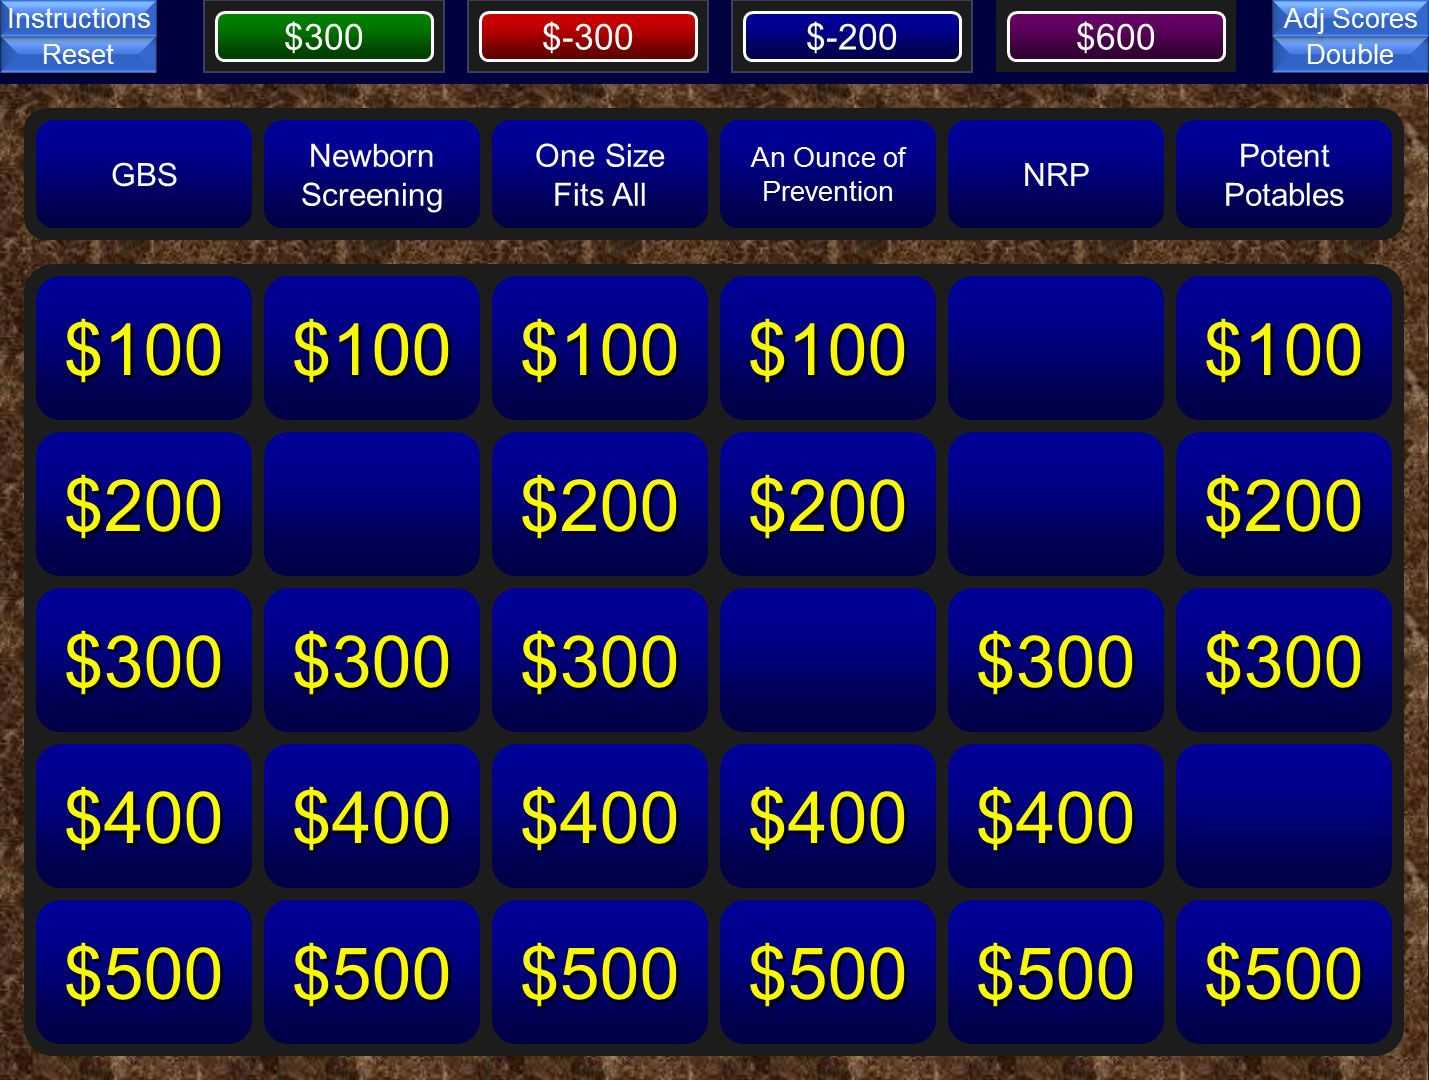 A Free Powerpoint Jeopardy Template For The Classroom. Keeps Regarding Jeopardy Powerpoint Template With Score